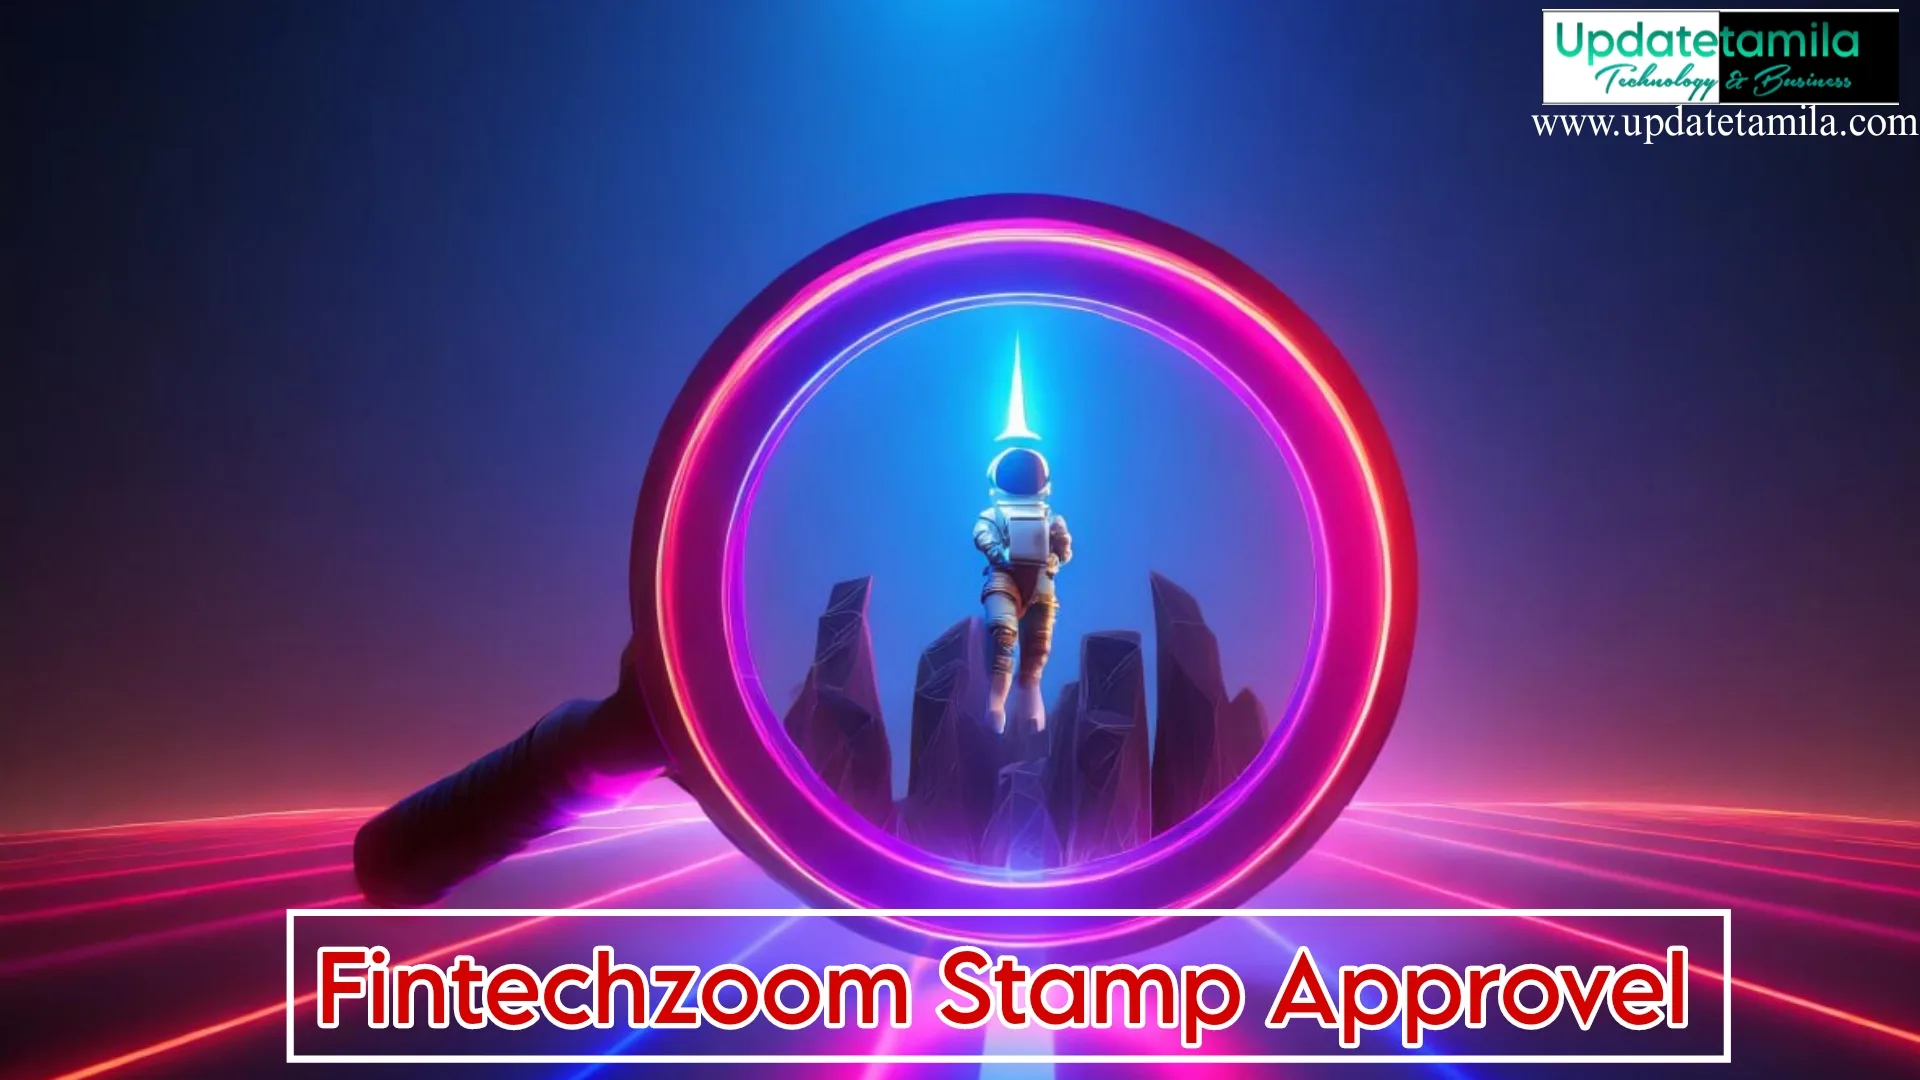 GM Stock Fintechzoom Stamp Approvel